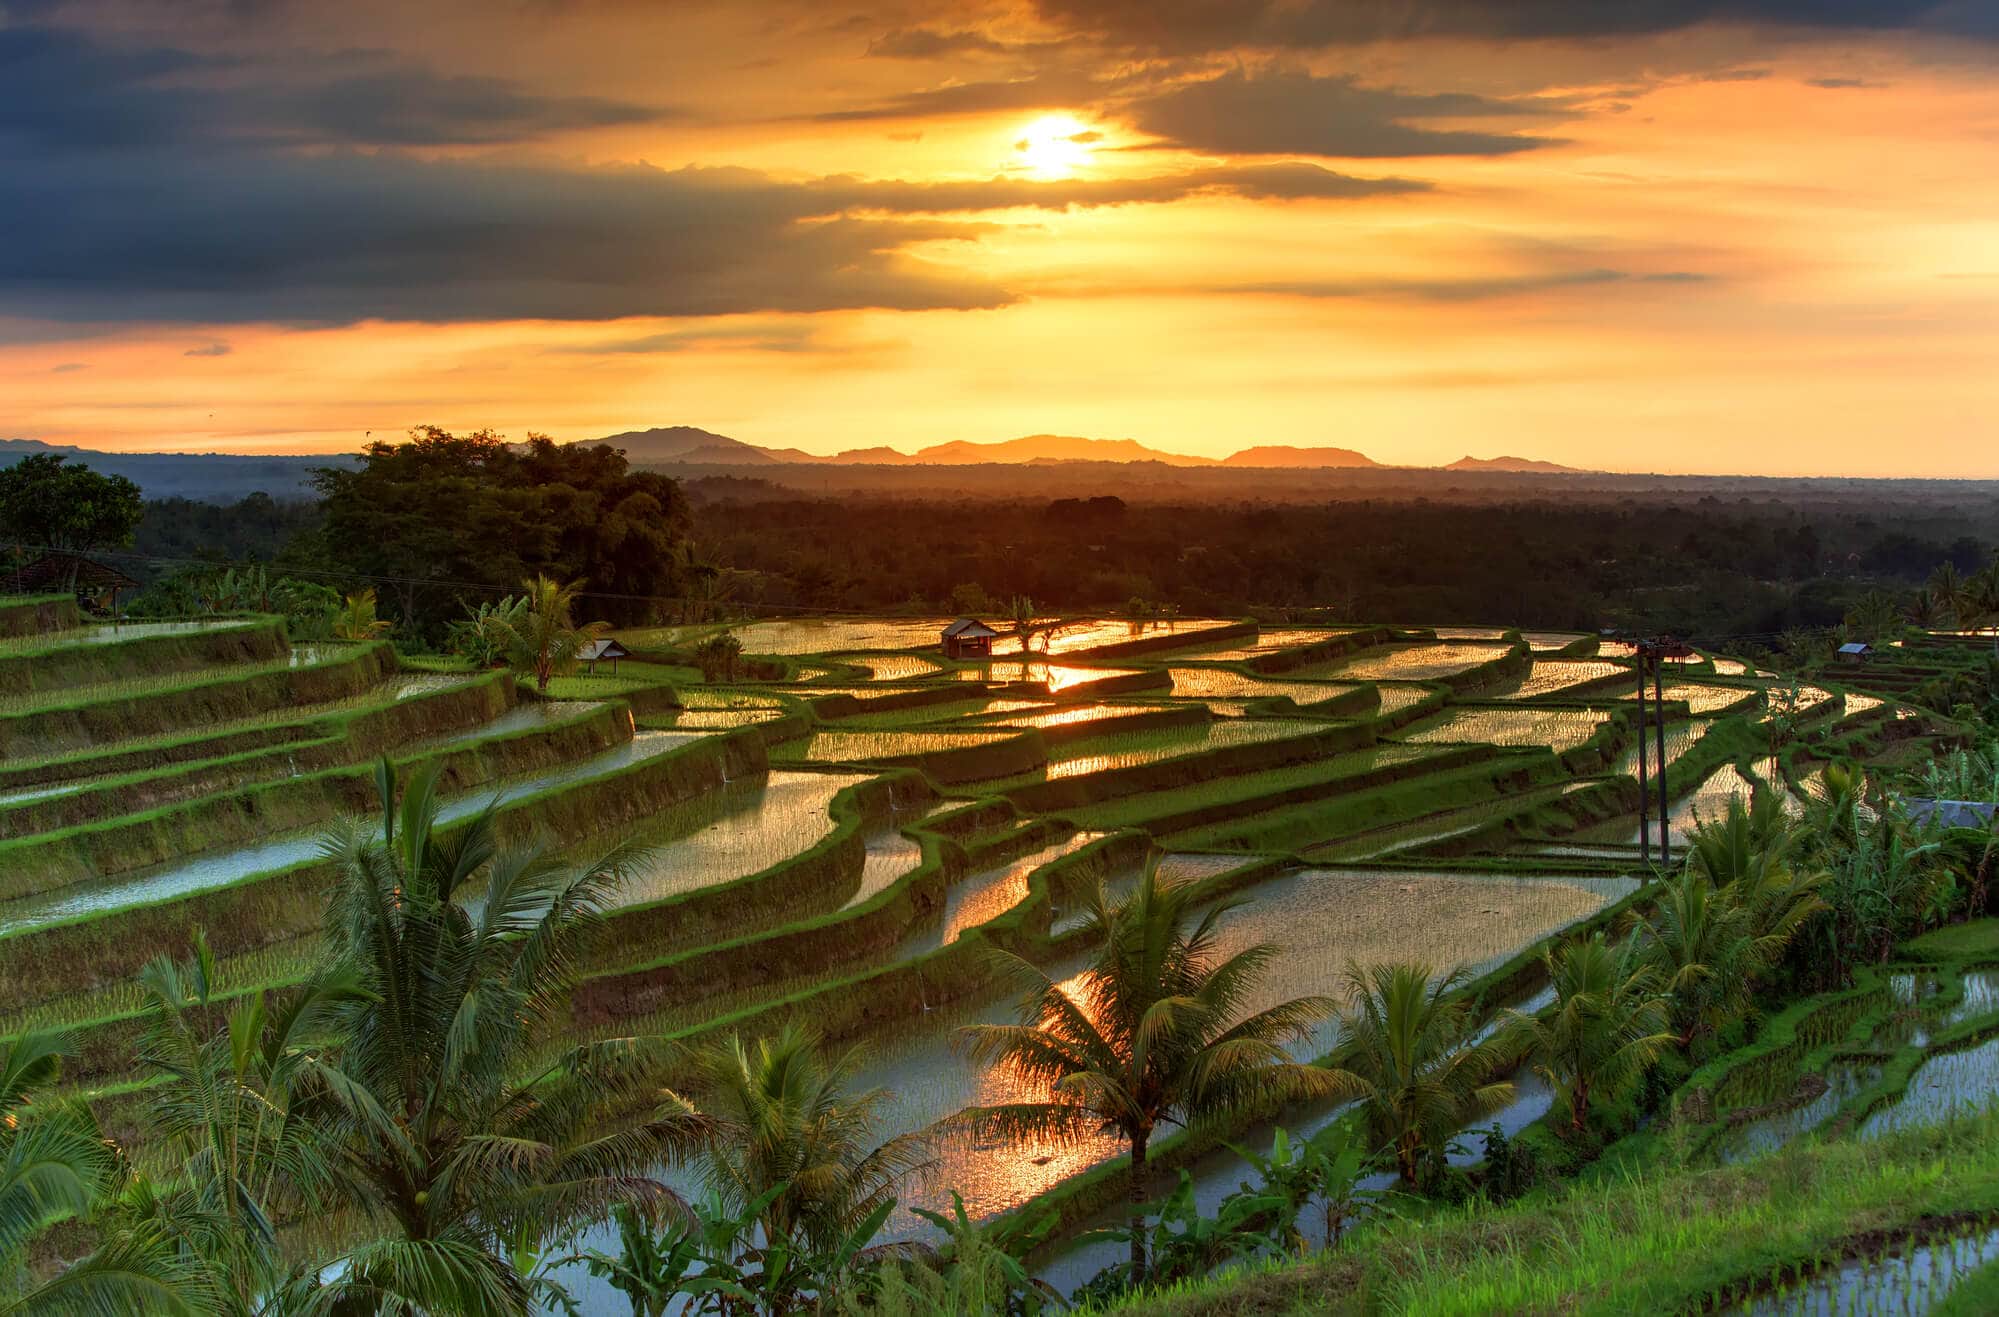 A golden sunset over the beautiful Jatiluwih Rice Terraces in Bali